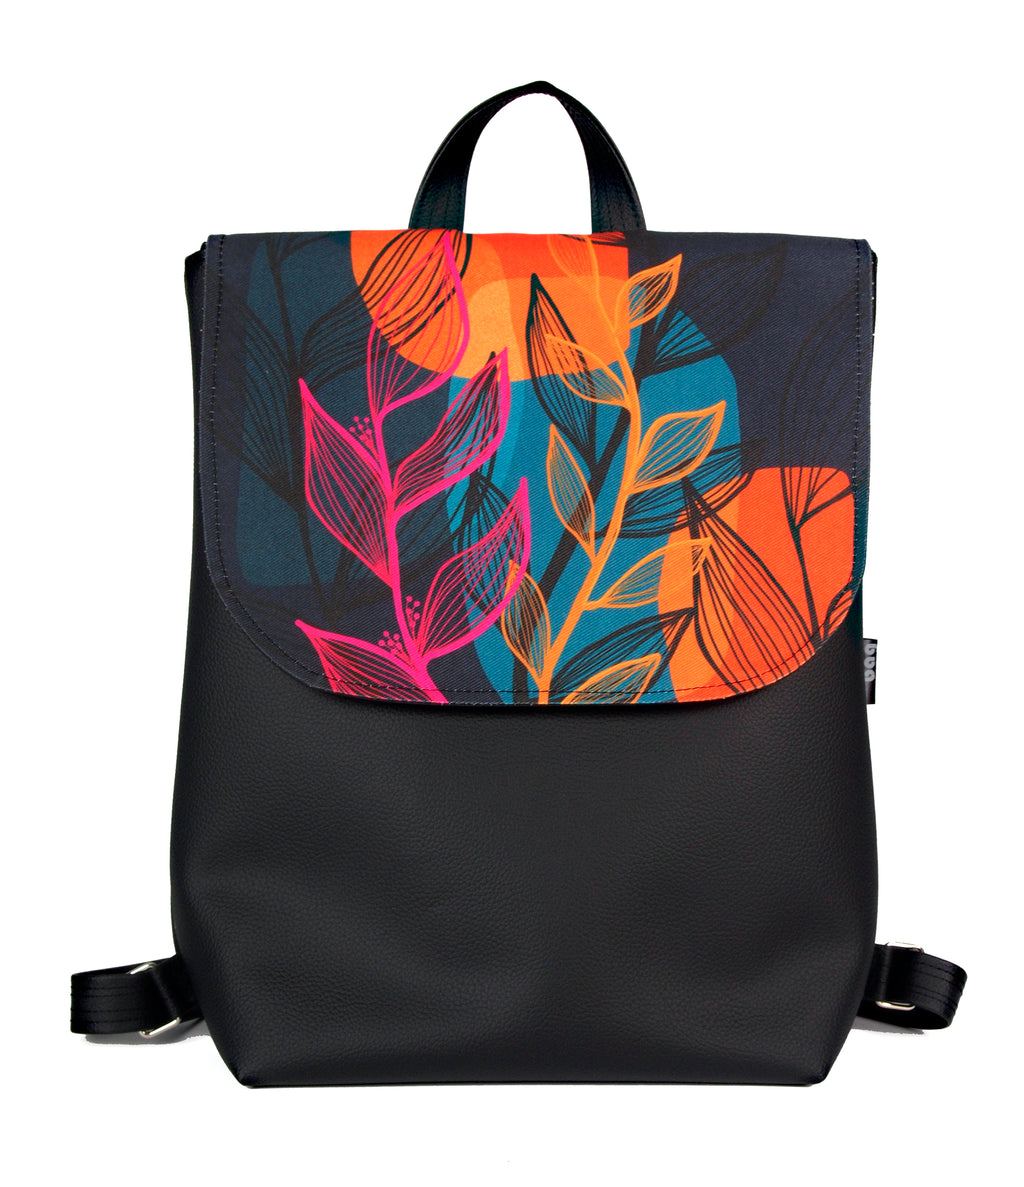 Bardo backpack large - Summer night - Premium backpack large from BARDO ART WORKS - Just lvabstract, apple tree, dark blue, flowers, forest, gift, handemade, nature, painted patterns, red, tablet, urban style, vegan leather, woman89.00! Shop now at BARDO ART WORKS